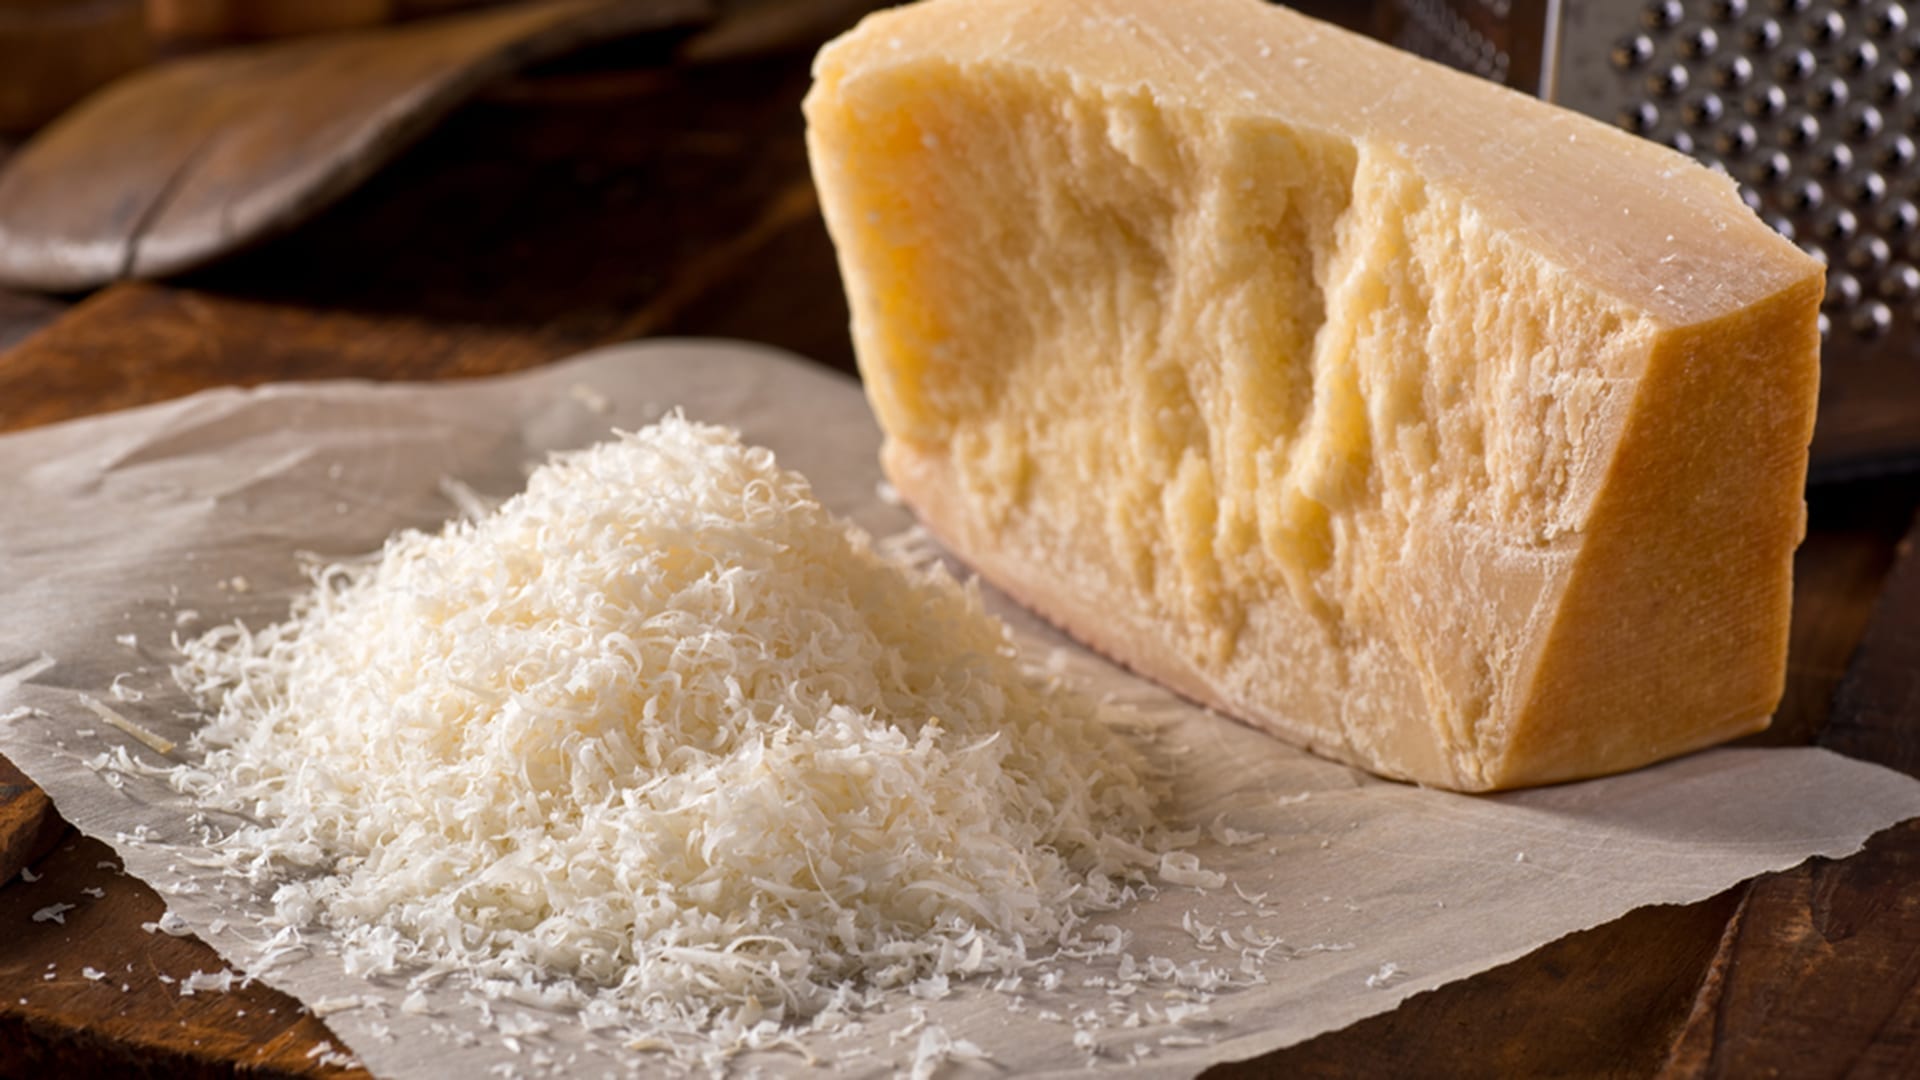 10 Cheesy Facts About the Parmesan Cheese That Came From Italy 4